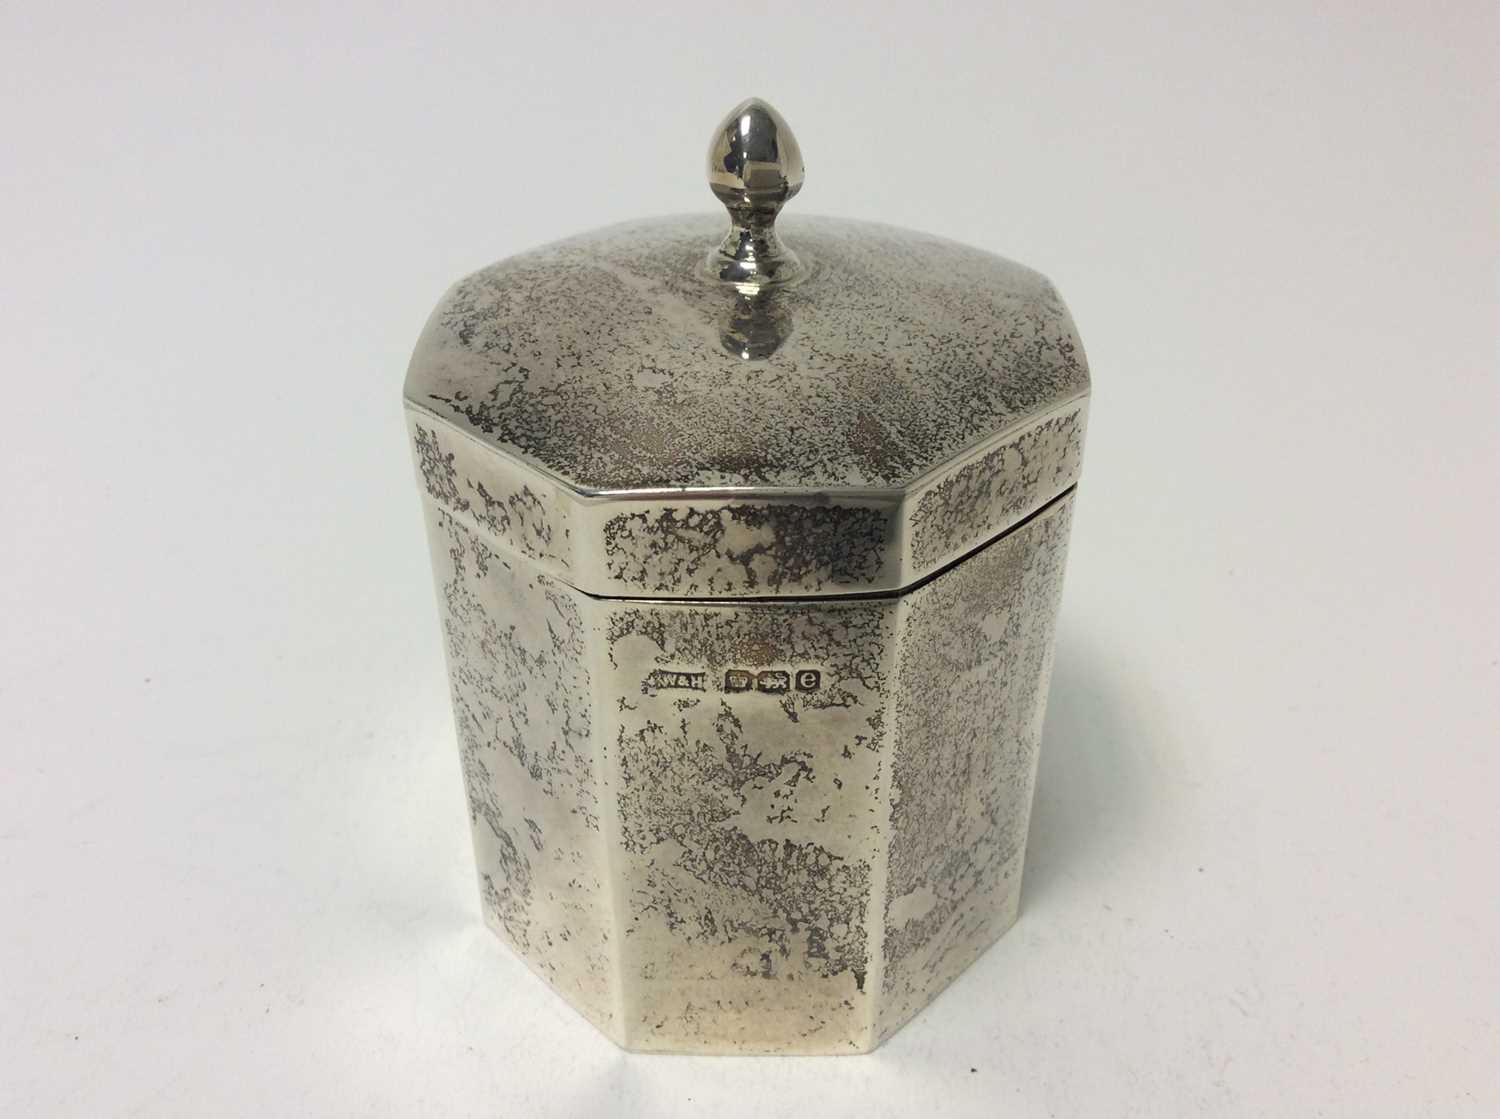 Lot 188 - George V silver tea caddy of faceted octagonal form with hinged cover and gilded interior, (Sheffield 1922) maker, Walker & Hall, at approximately 7oz, 10cm in height